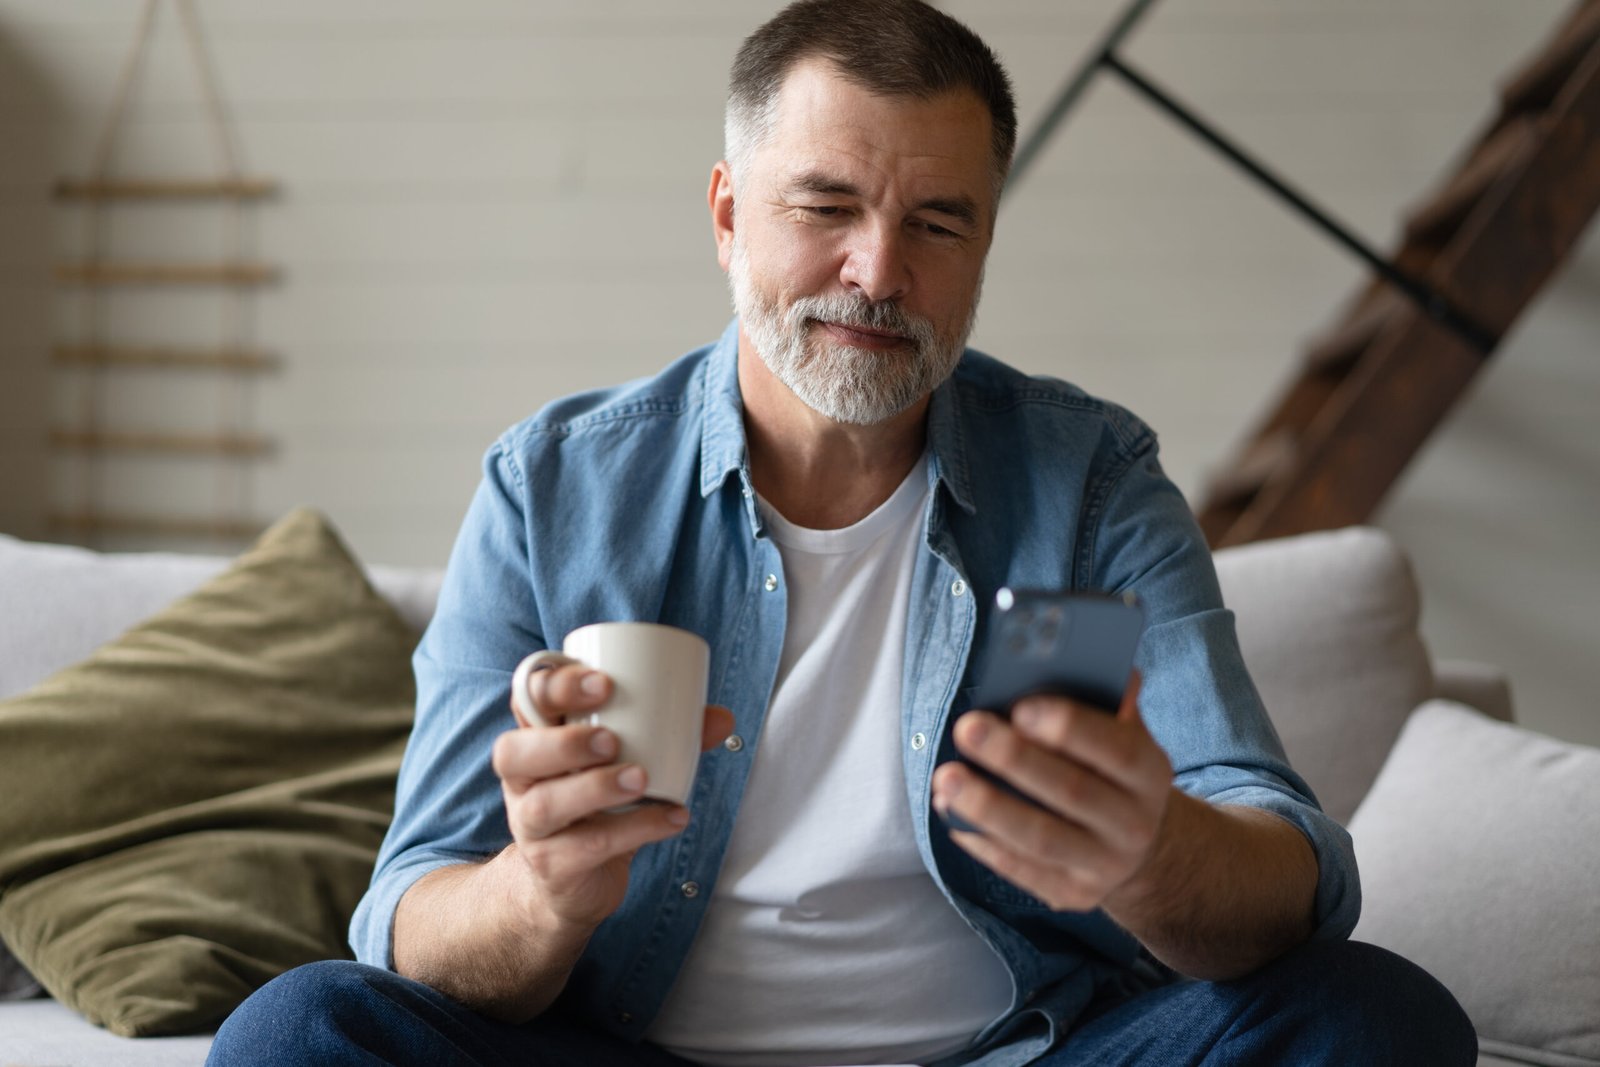 Happy smiling senior man using smartphone device while sitting on sofa at home. Mature man lying on couch reading messages on mobile phone, relaxing at home.